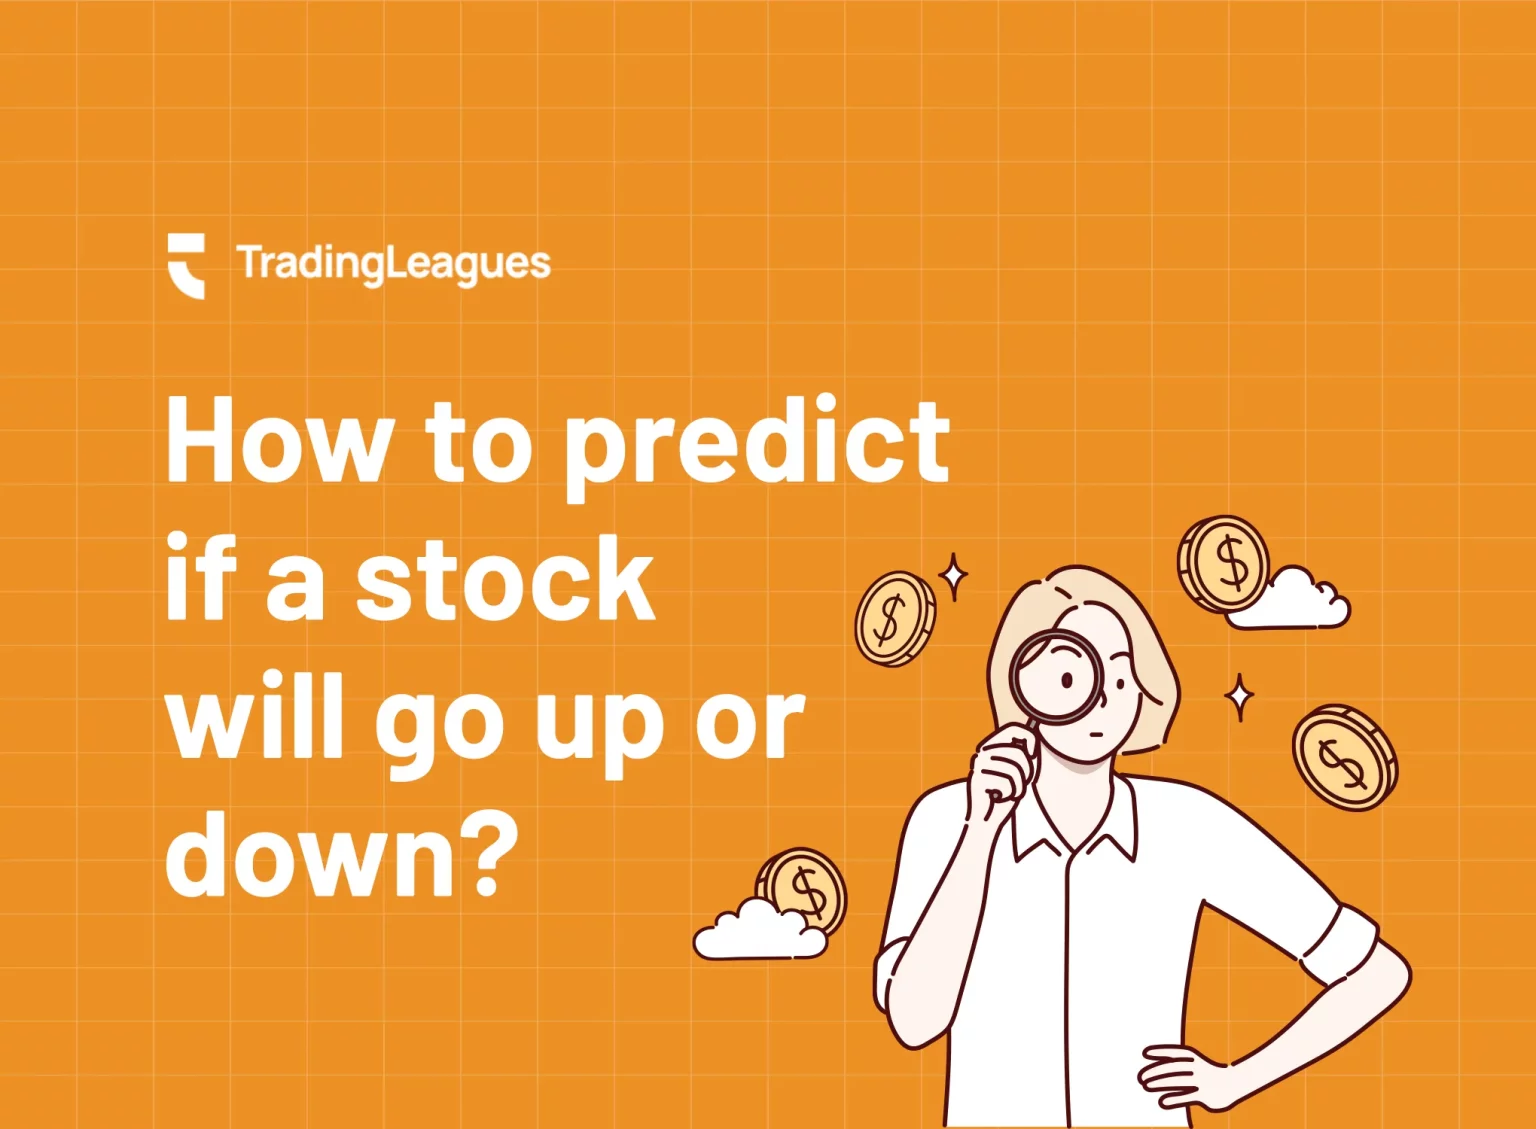 How to predict if a stock will go up or down